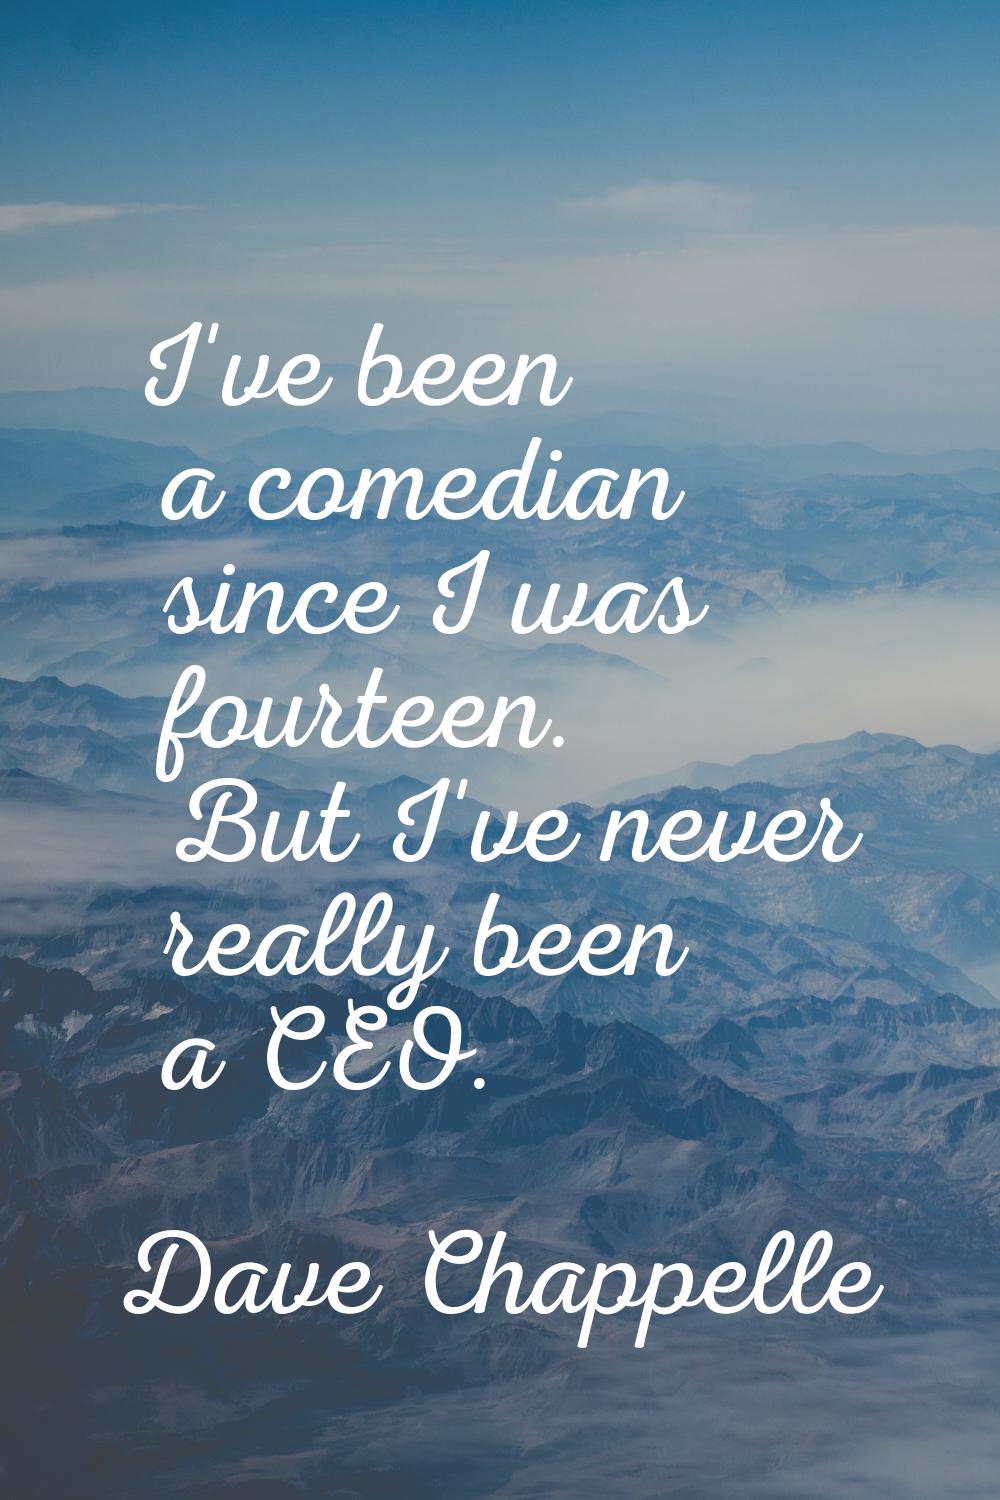 I've been a comedian since I was fourteen. But I've never really been a CEO.